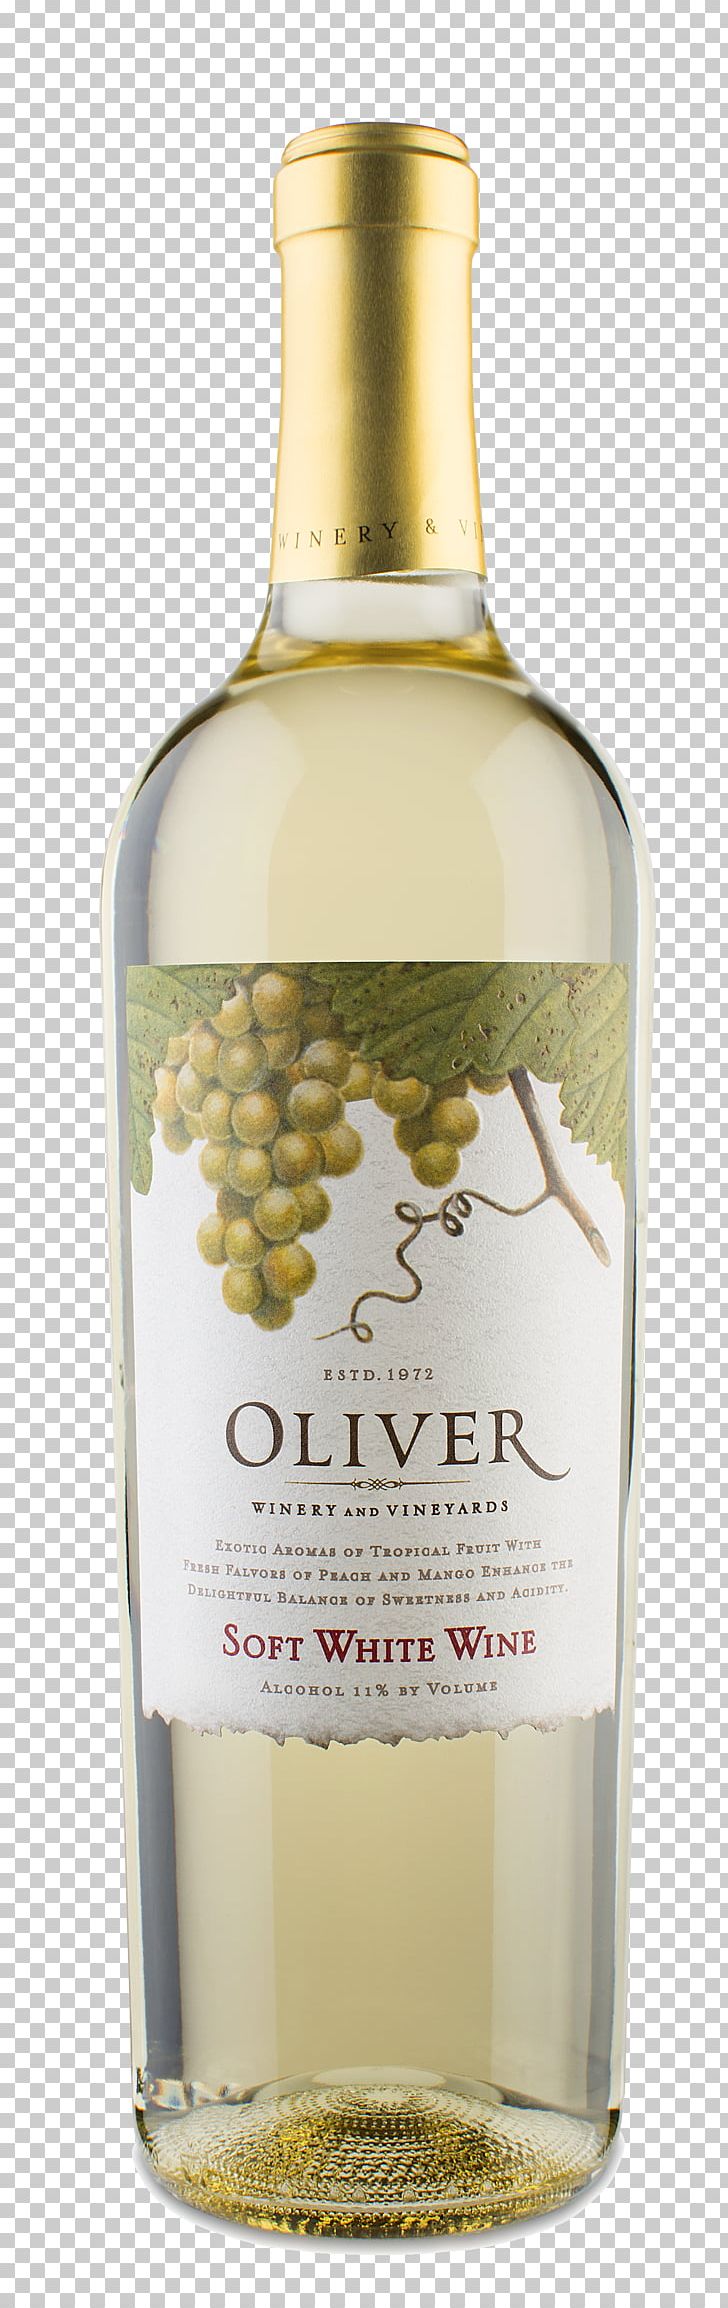 Liqueur White Wine Oliver Winery Common Grape Vine PNG, Clipart, Alcoholic Beverage, Alcoholic Drink, Bottle, Common Grape Vine, Concord Grape Free PNG Download